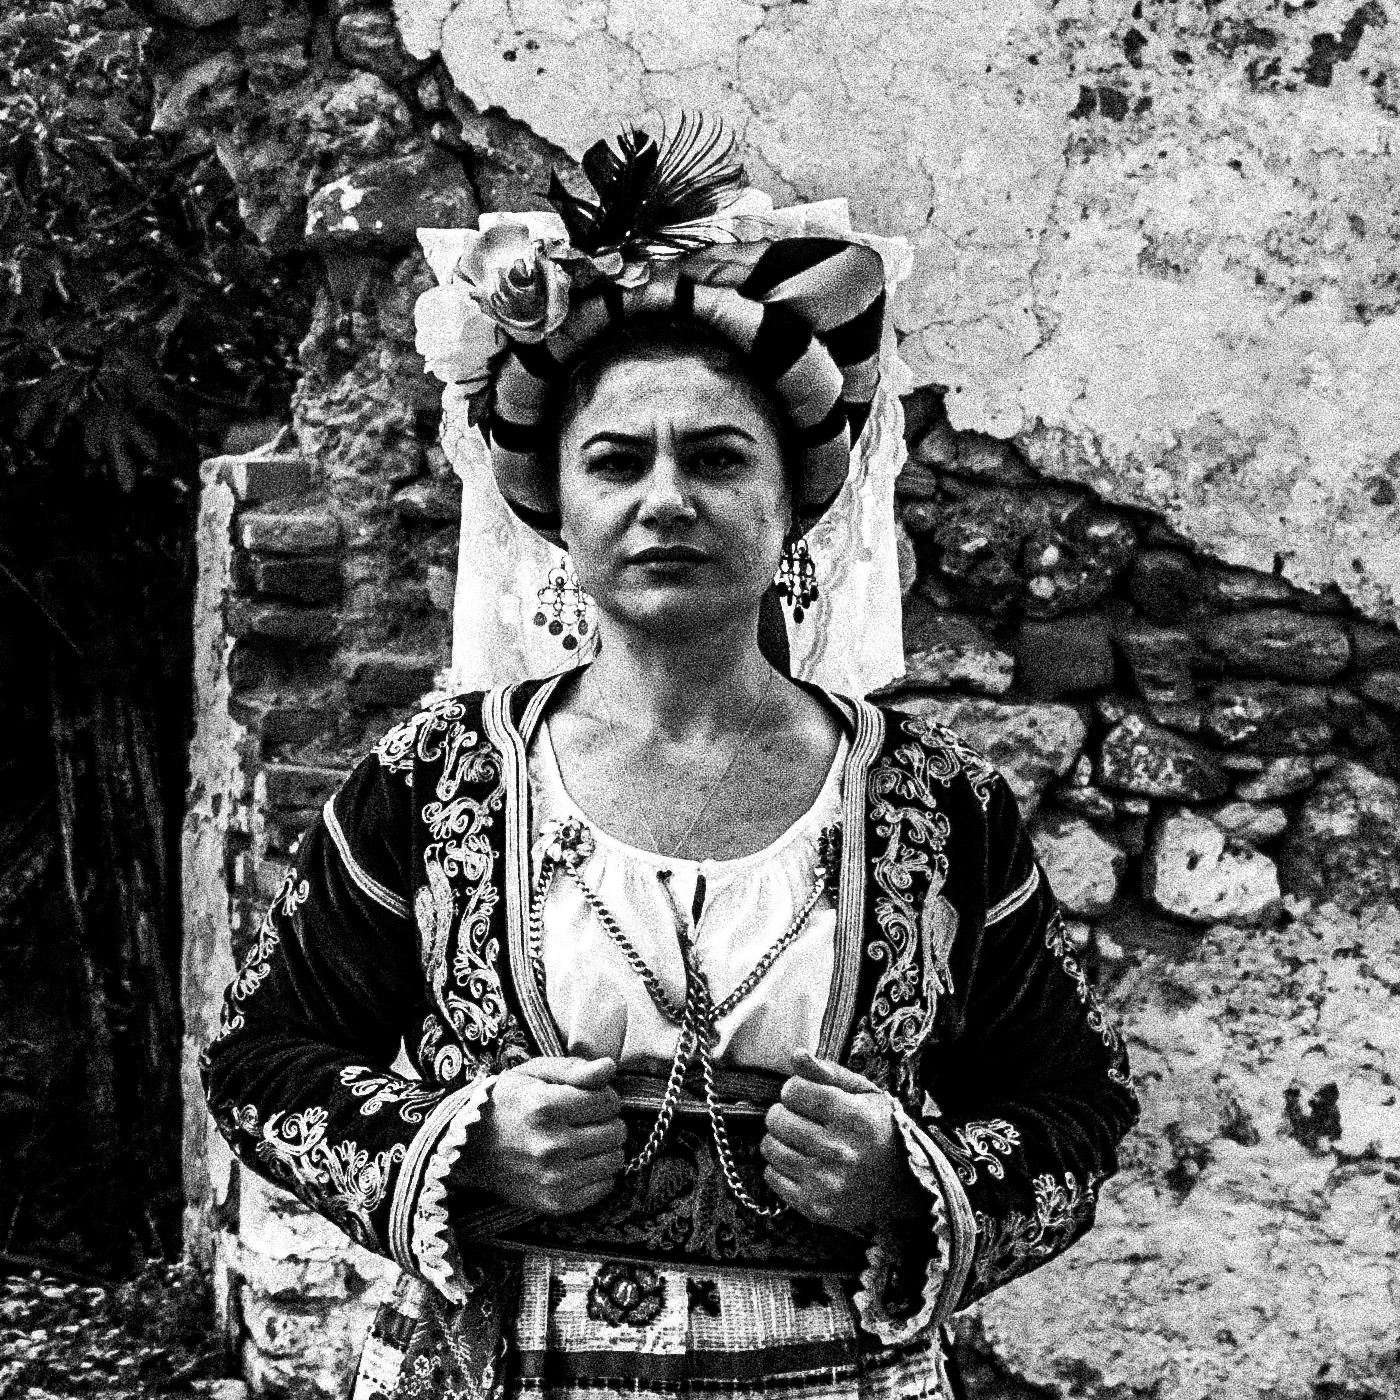 Black and White Photography Wall Art Greece | Costumes of southern Corfu island in front a traditional house Ionian Sea by George Tatakis - detailed view